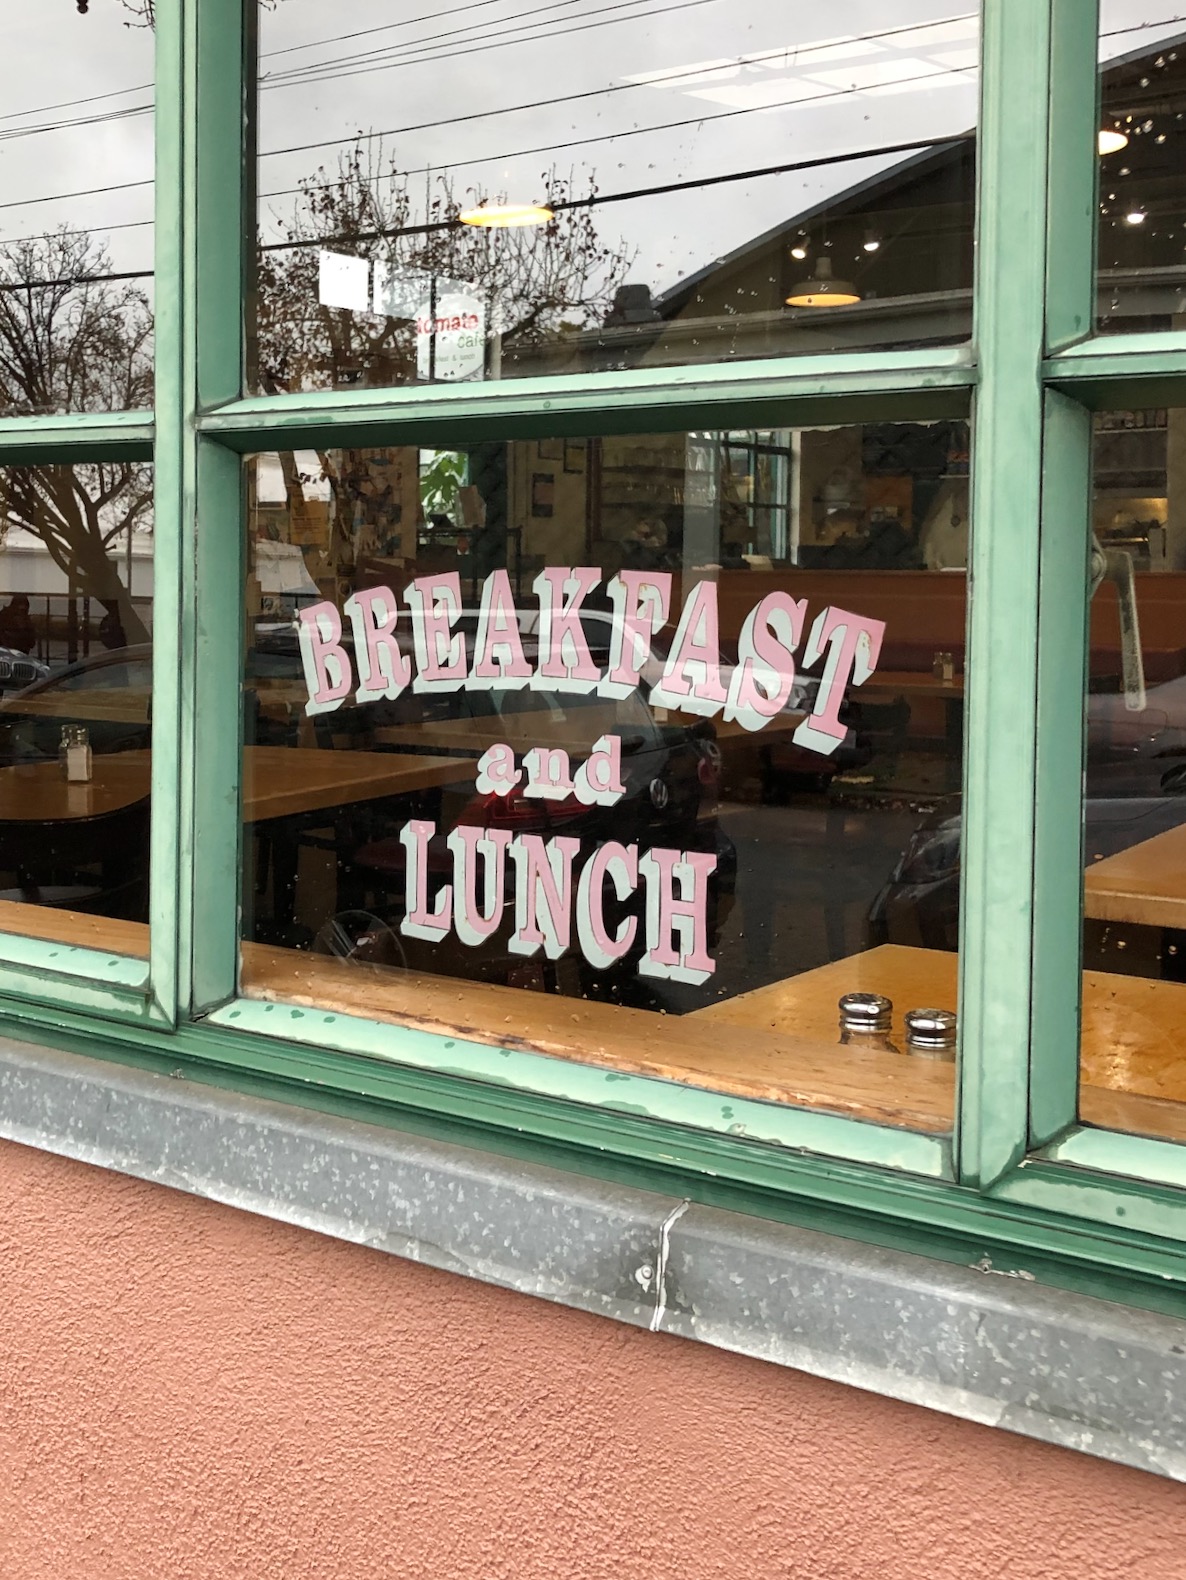 window of restaurant with breakfast and lunch sign